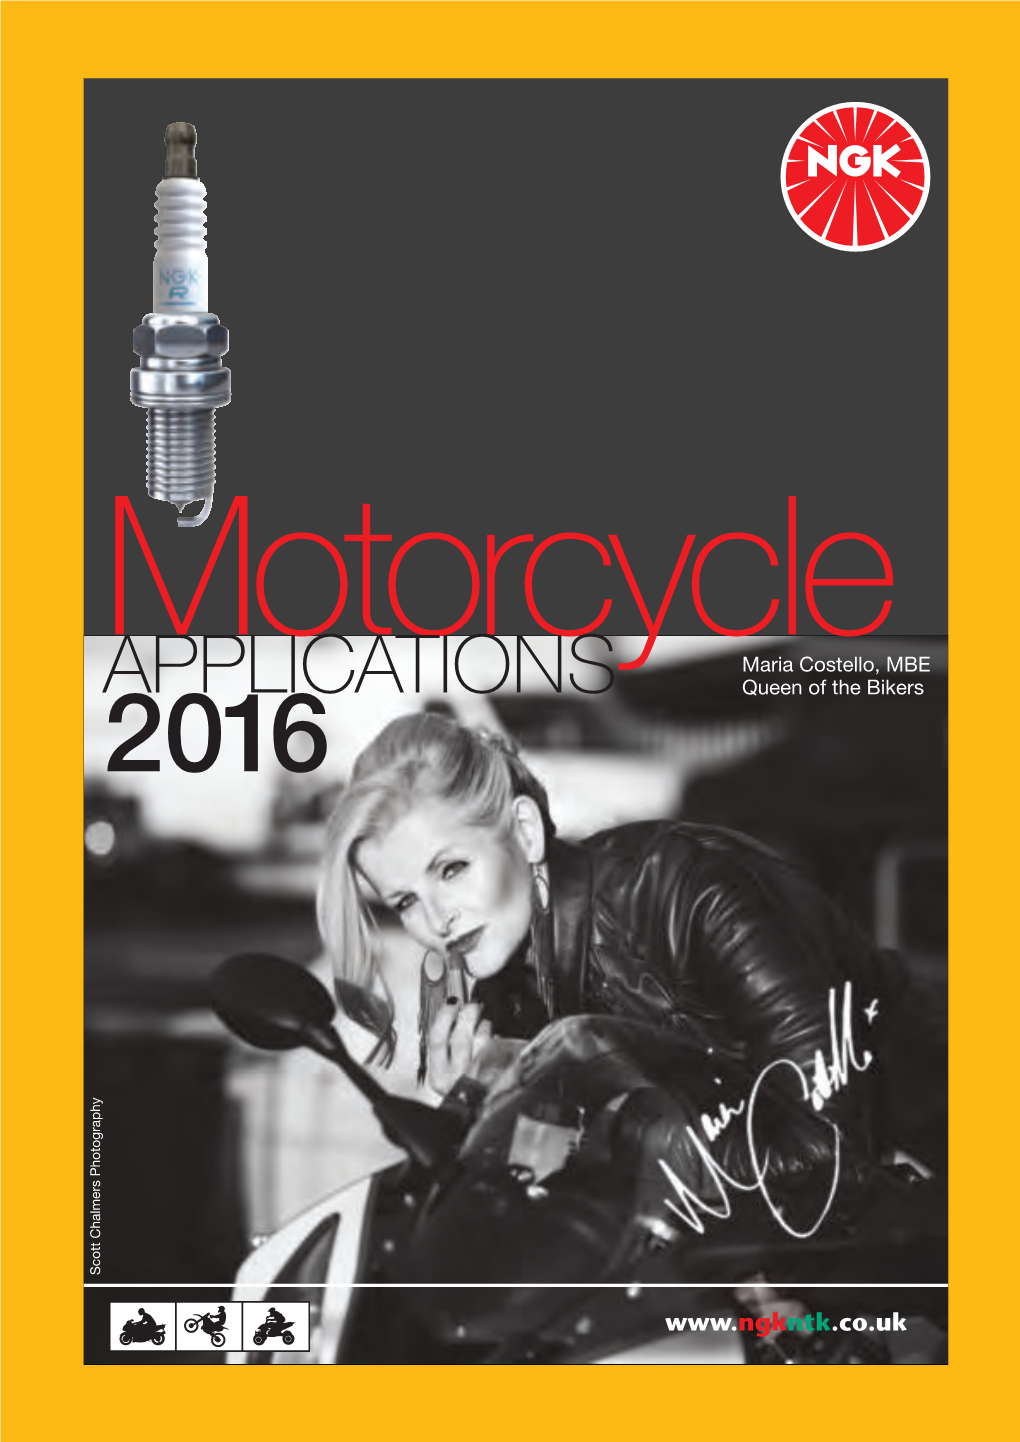 2016 Motorcycle Catalogue Layout 1 24/11/2015 14:30 Page 1 6 1 0 2 S N O I T a C I L P P a E L C Y C R O T O M K G N